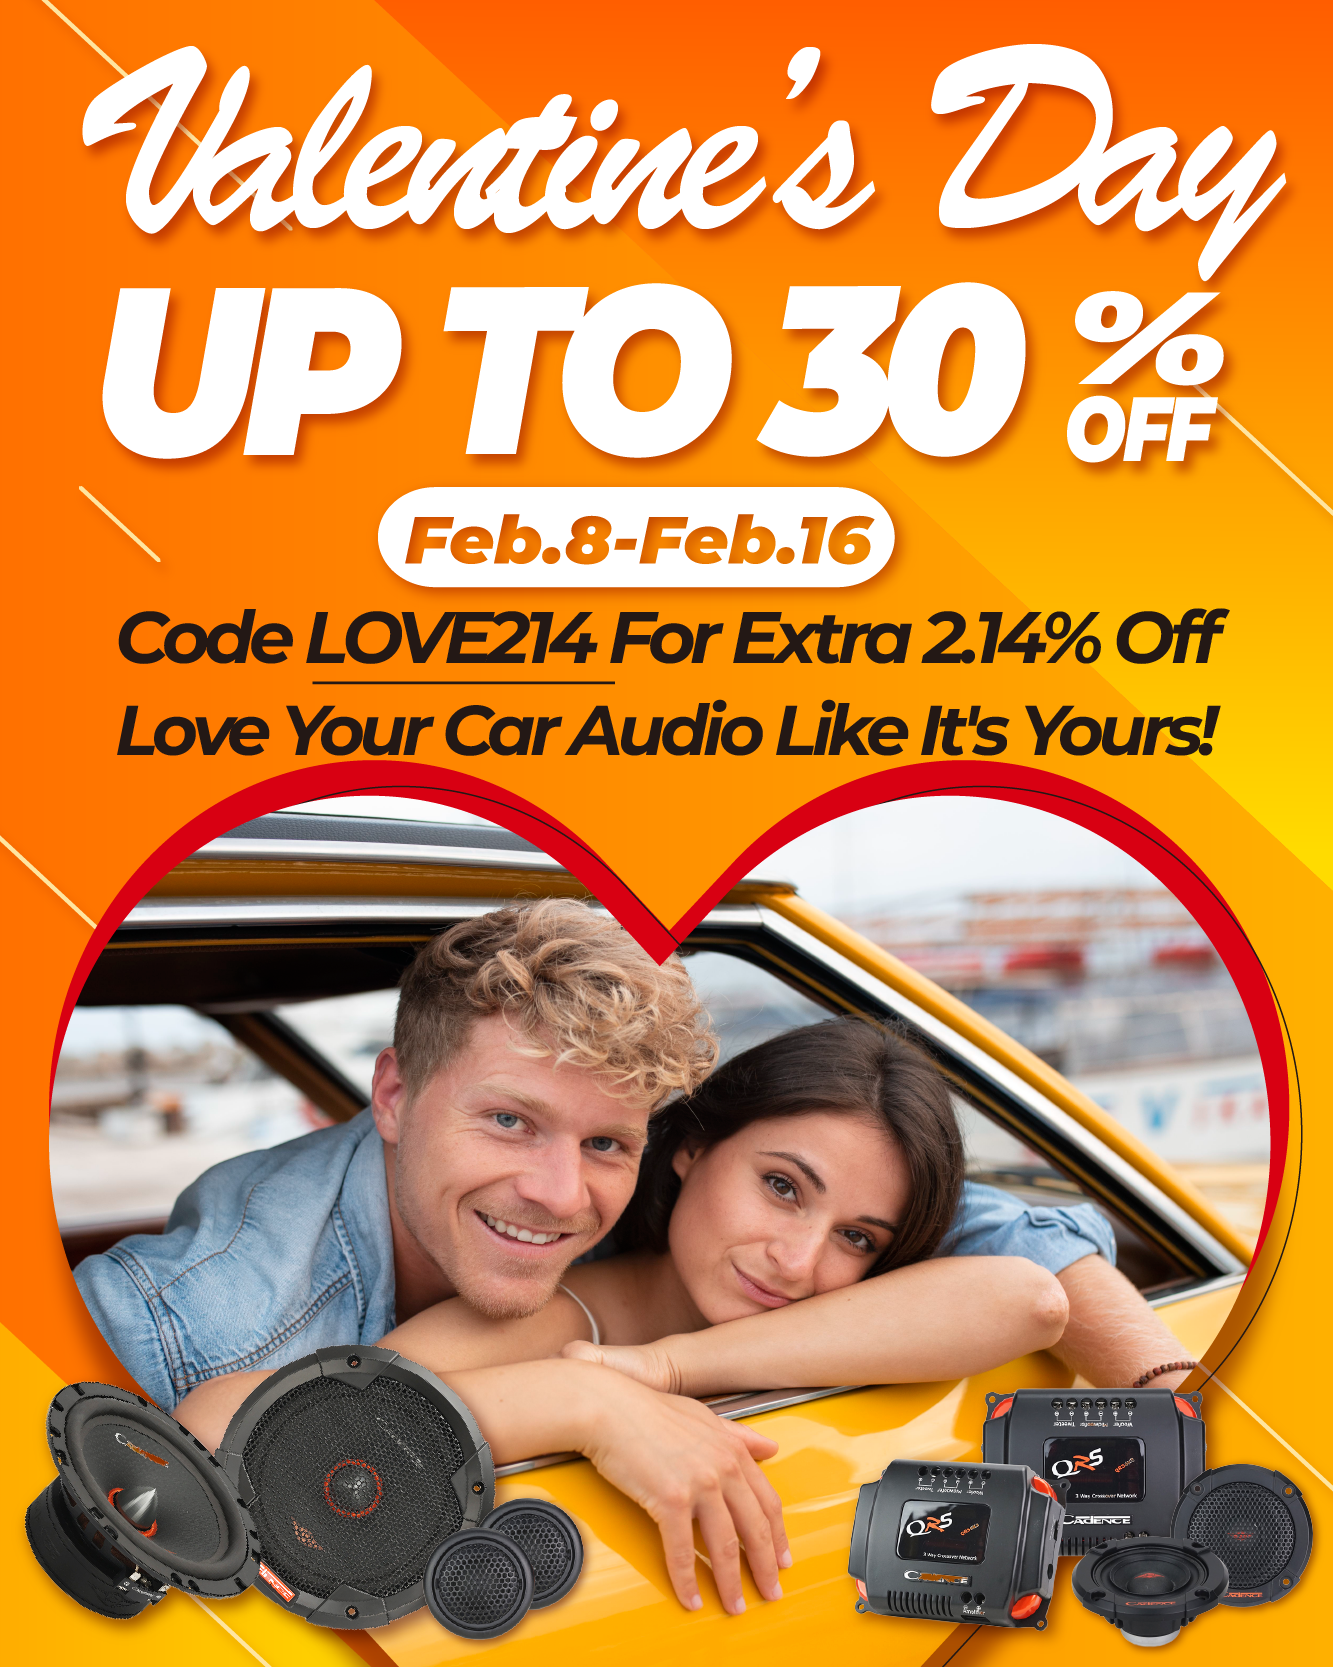 Valentine's Day up to 30% off